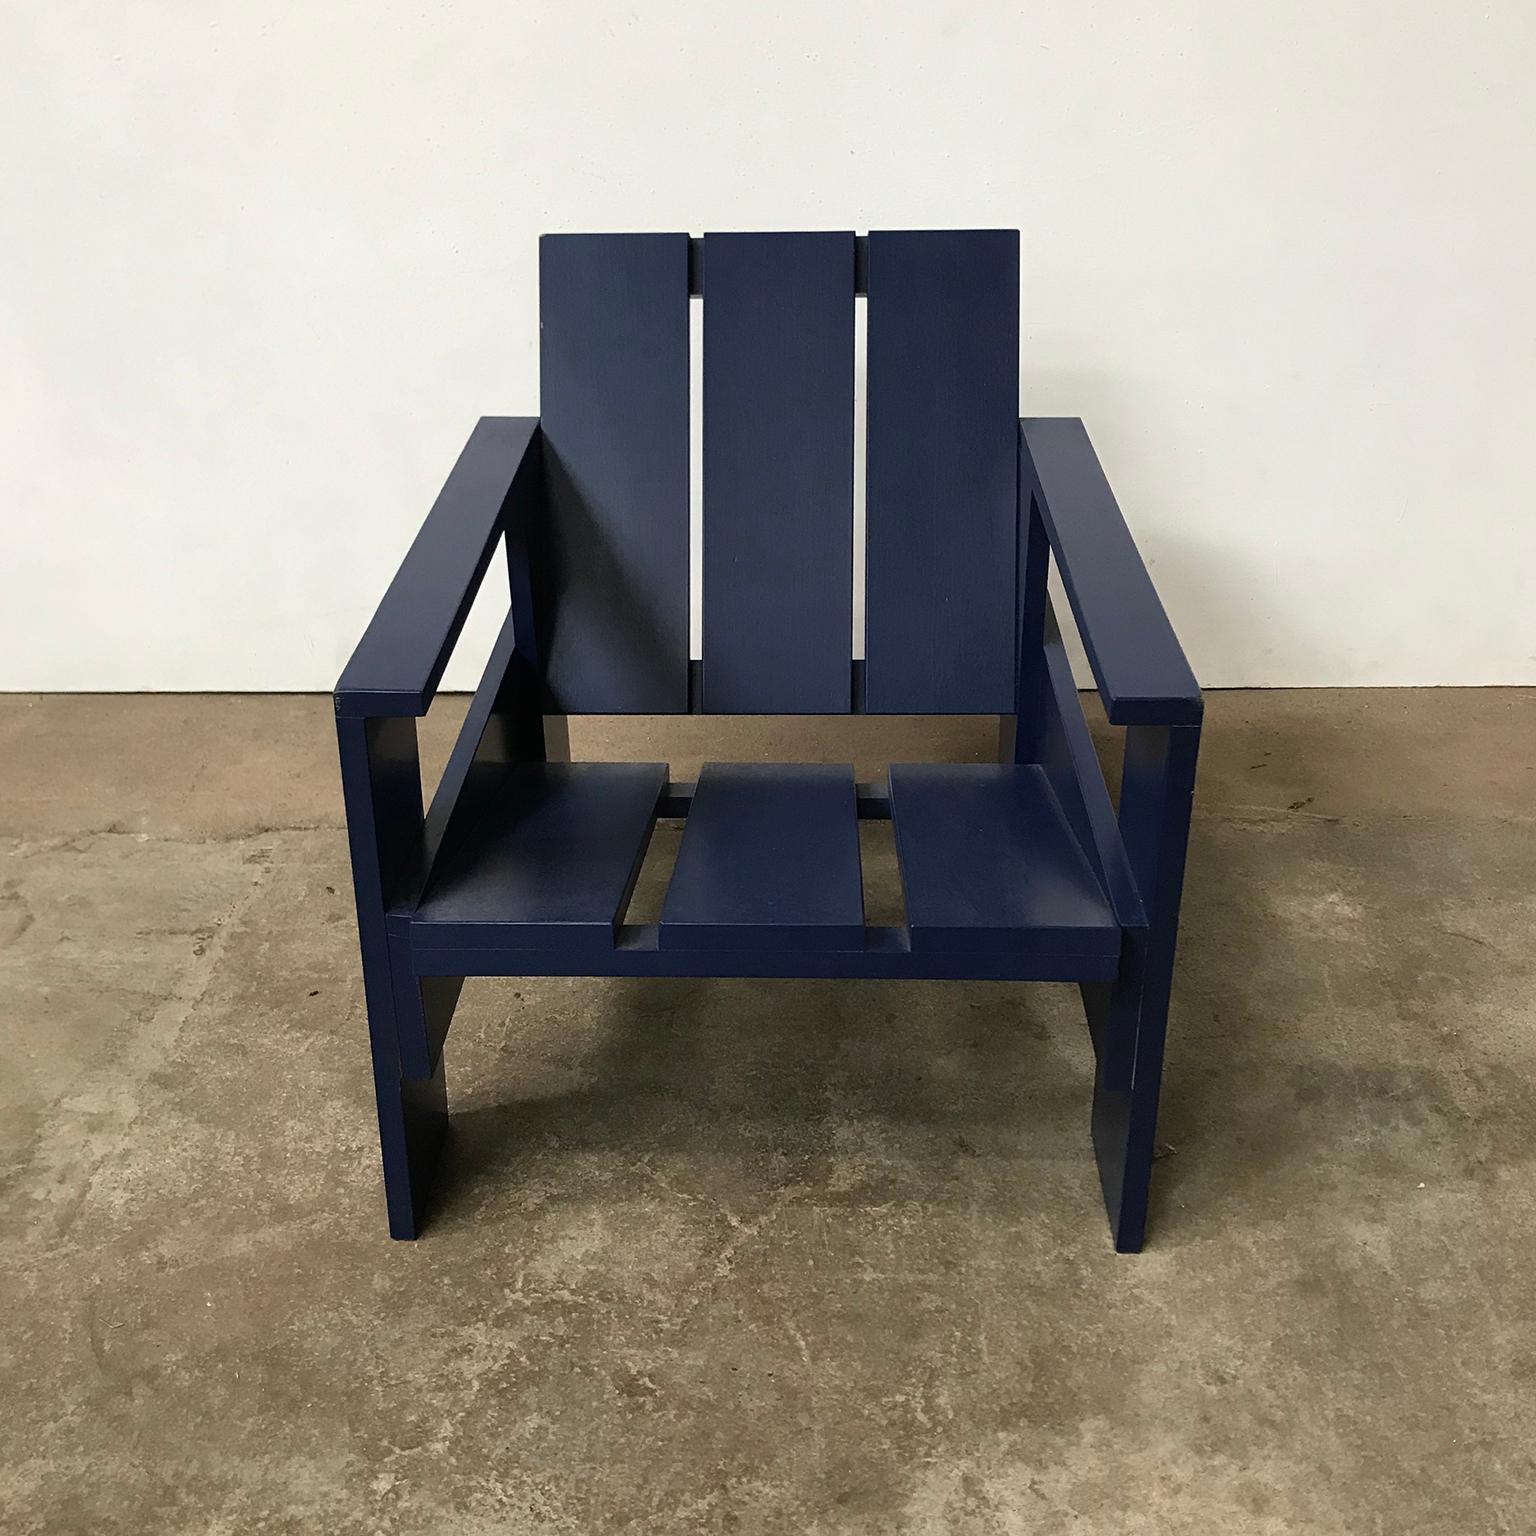 Wood 1934, Gerrit Rietveld, by Rietveld Family, Number 41, Children Crate Chair Blue